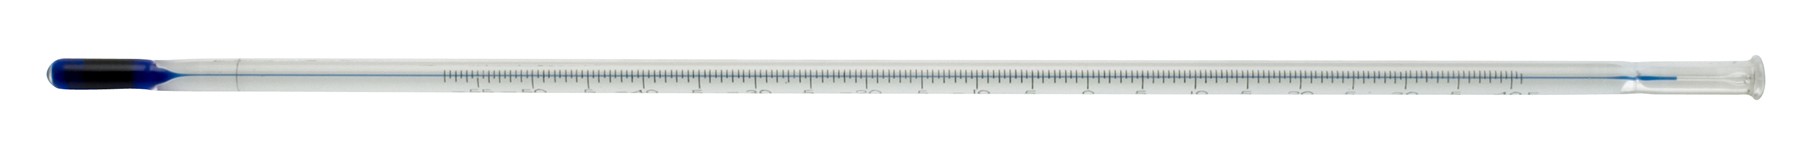 SP Bel-Art, H-B DURAC Plus ASTM Like Liquid-In-Glass Laboratory Thermometer, 6F / Low Cloud and Pour, 76mm Immersion, -112 to 70F, Organic Liquid Fill